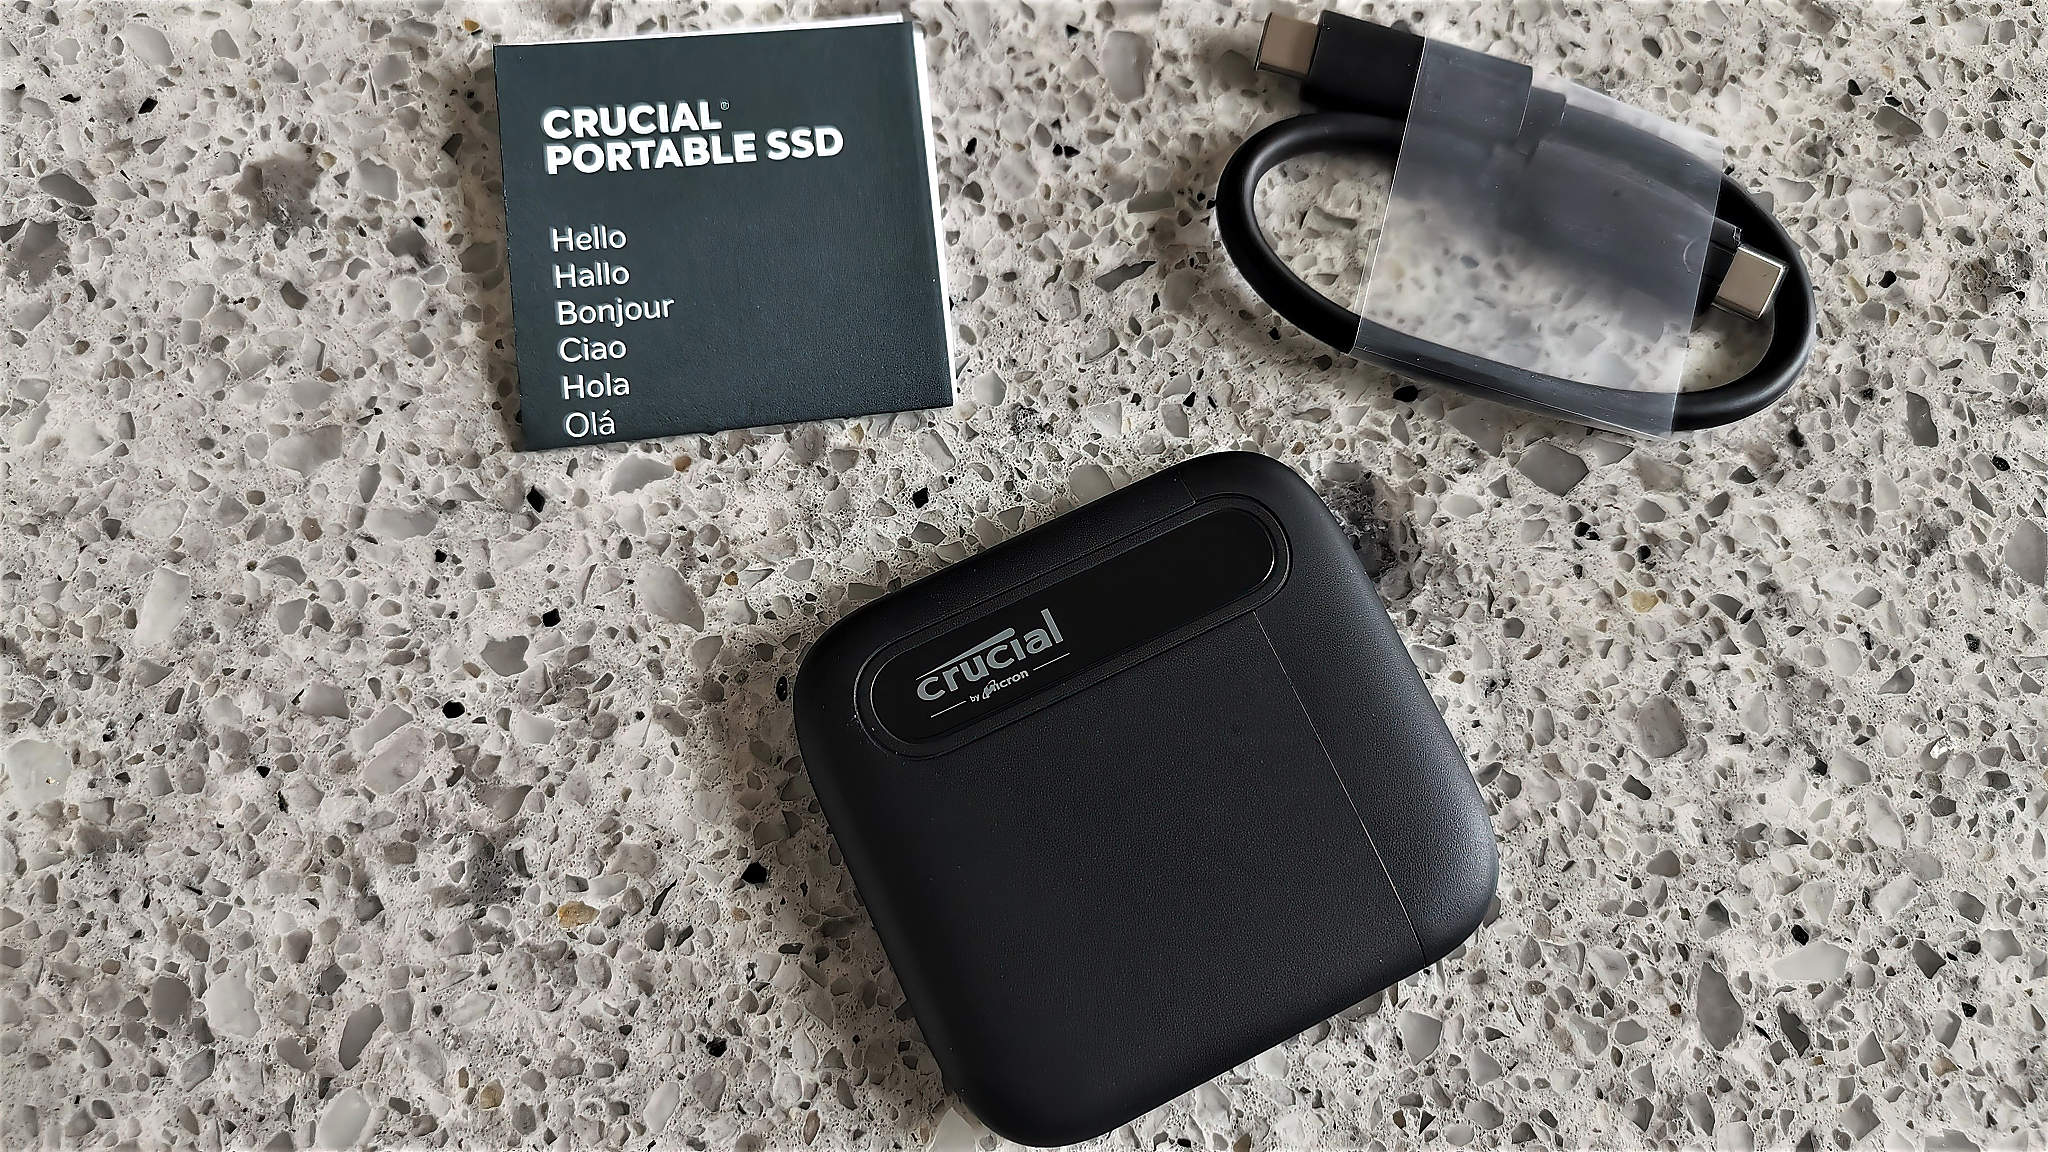 Crucial X6 4TB Portable SSD Review - High Speed 4TB Portable SSD at a Low  Price Point